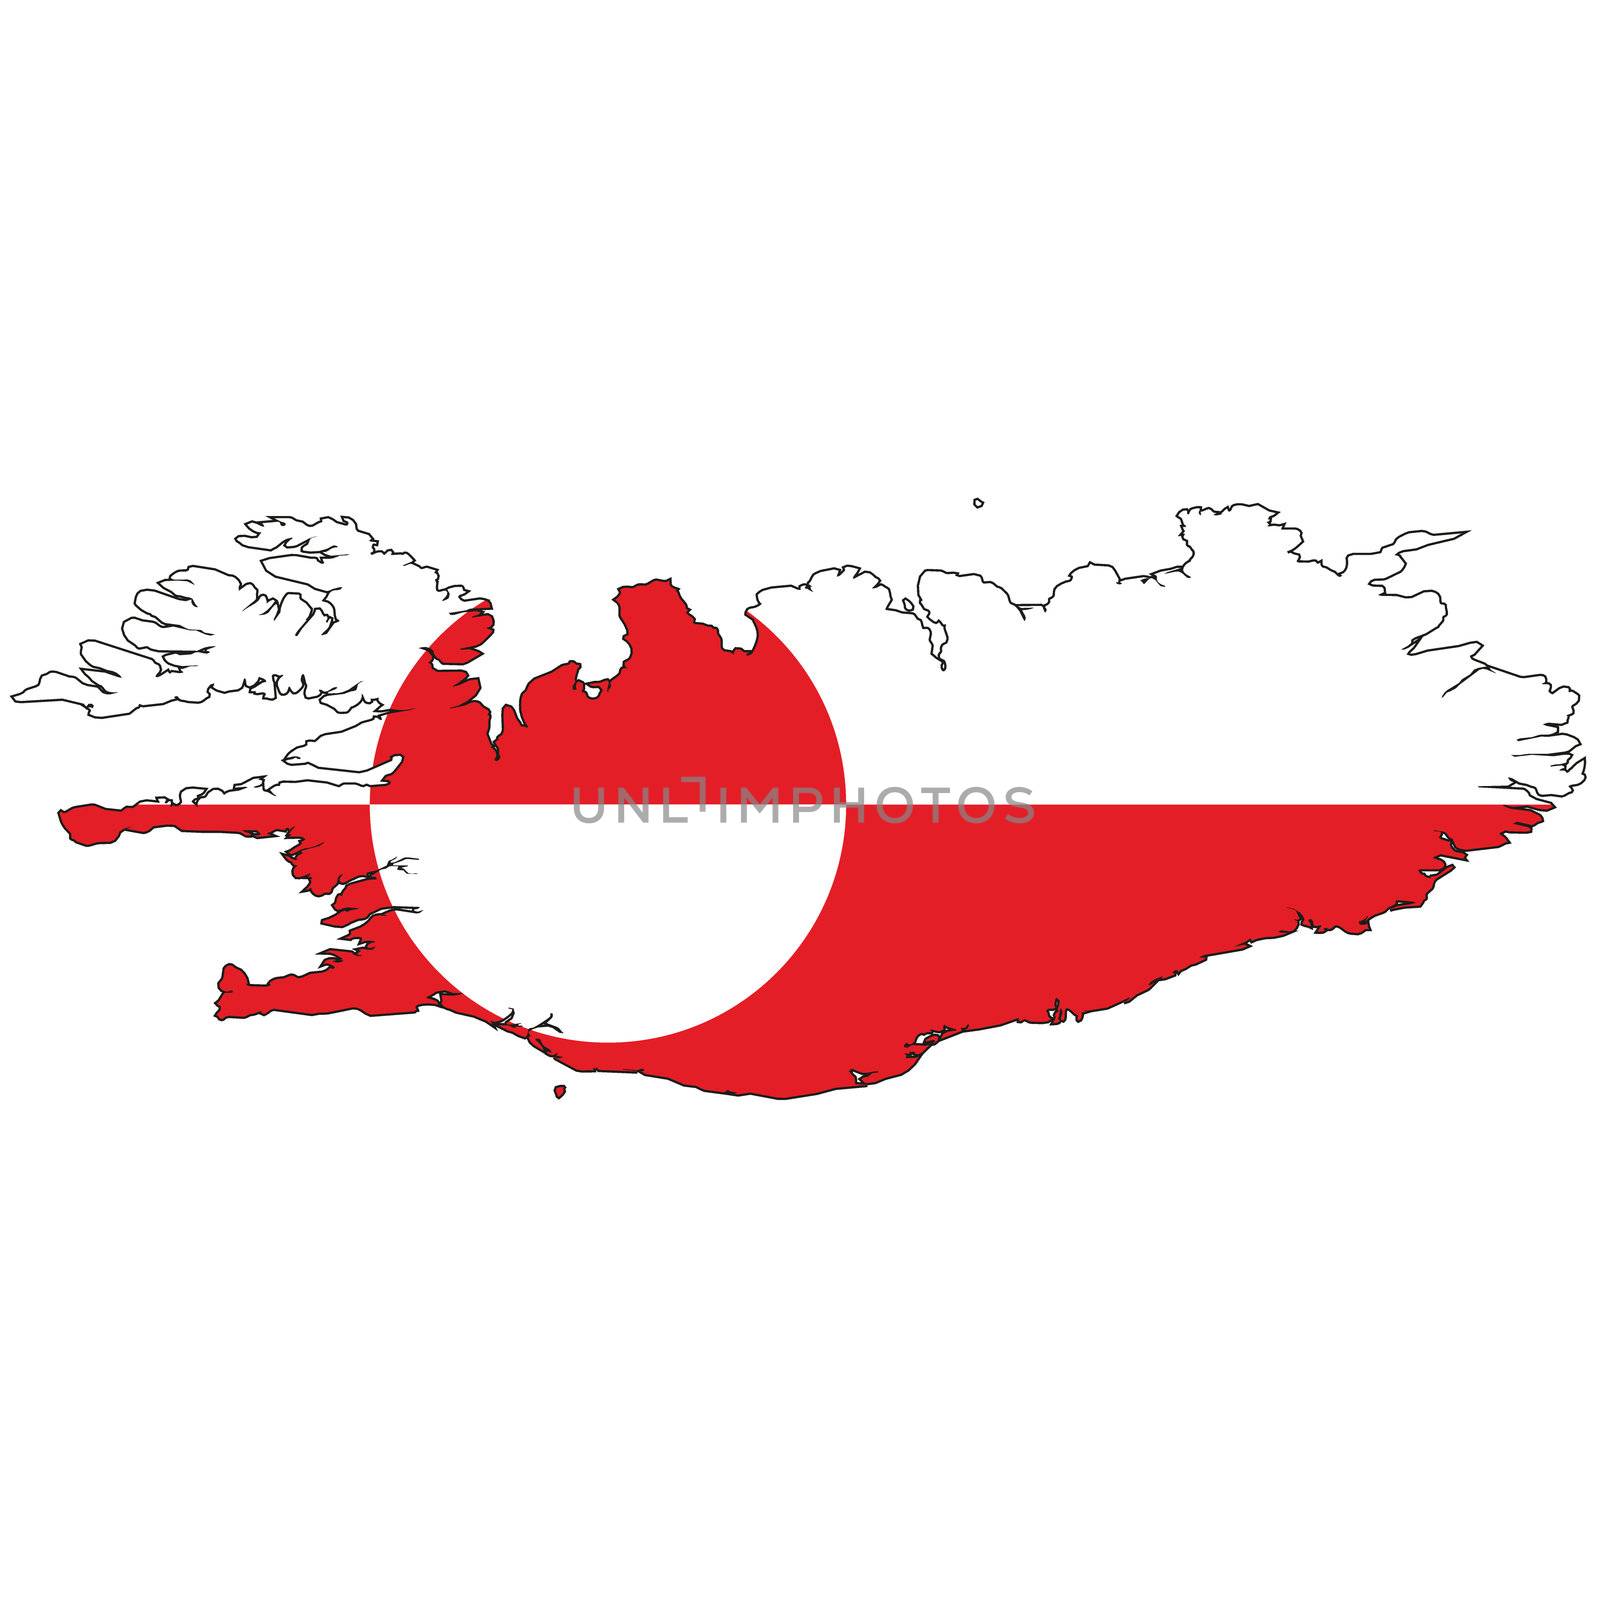 Country outline with the flag of Greenland in it